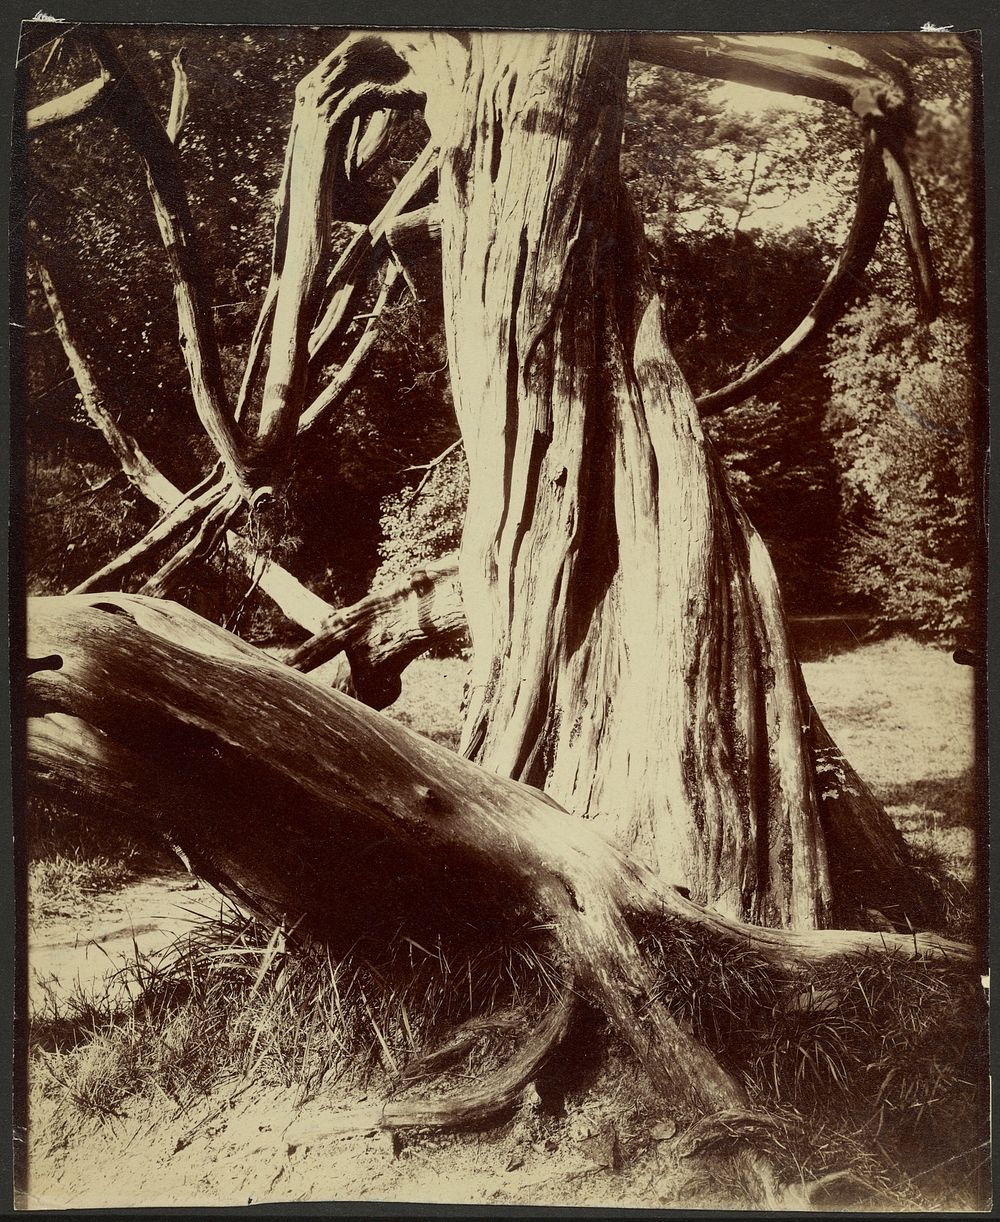 Sapin, Trianon by Eugène Atget